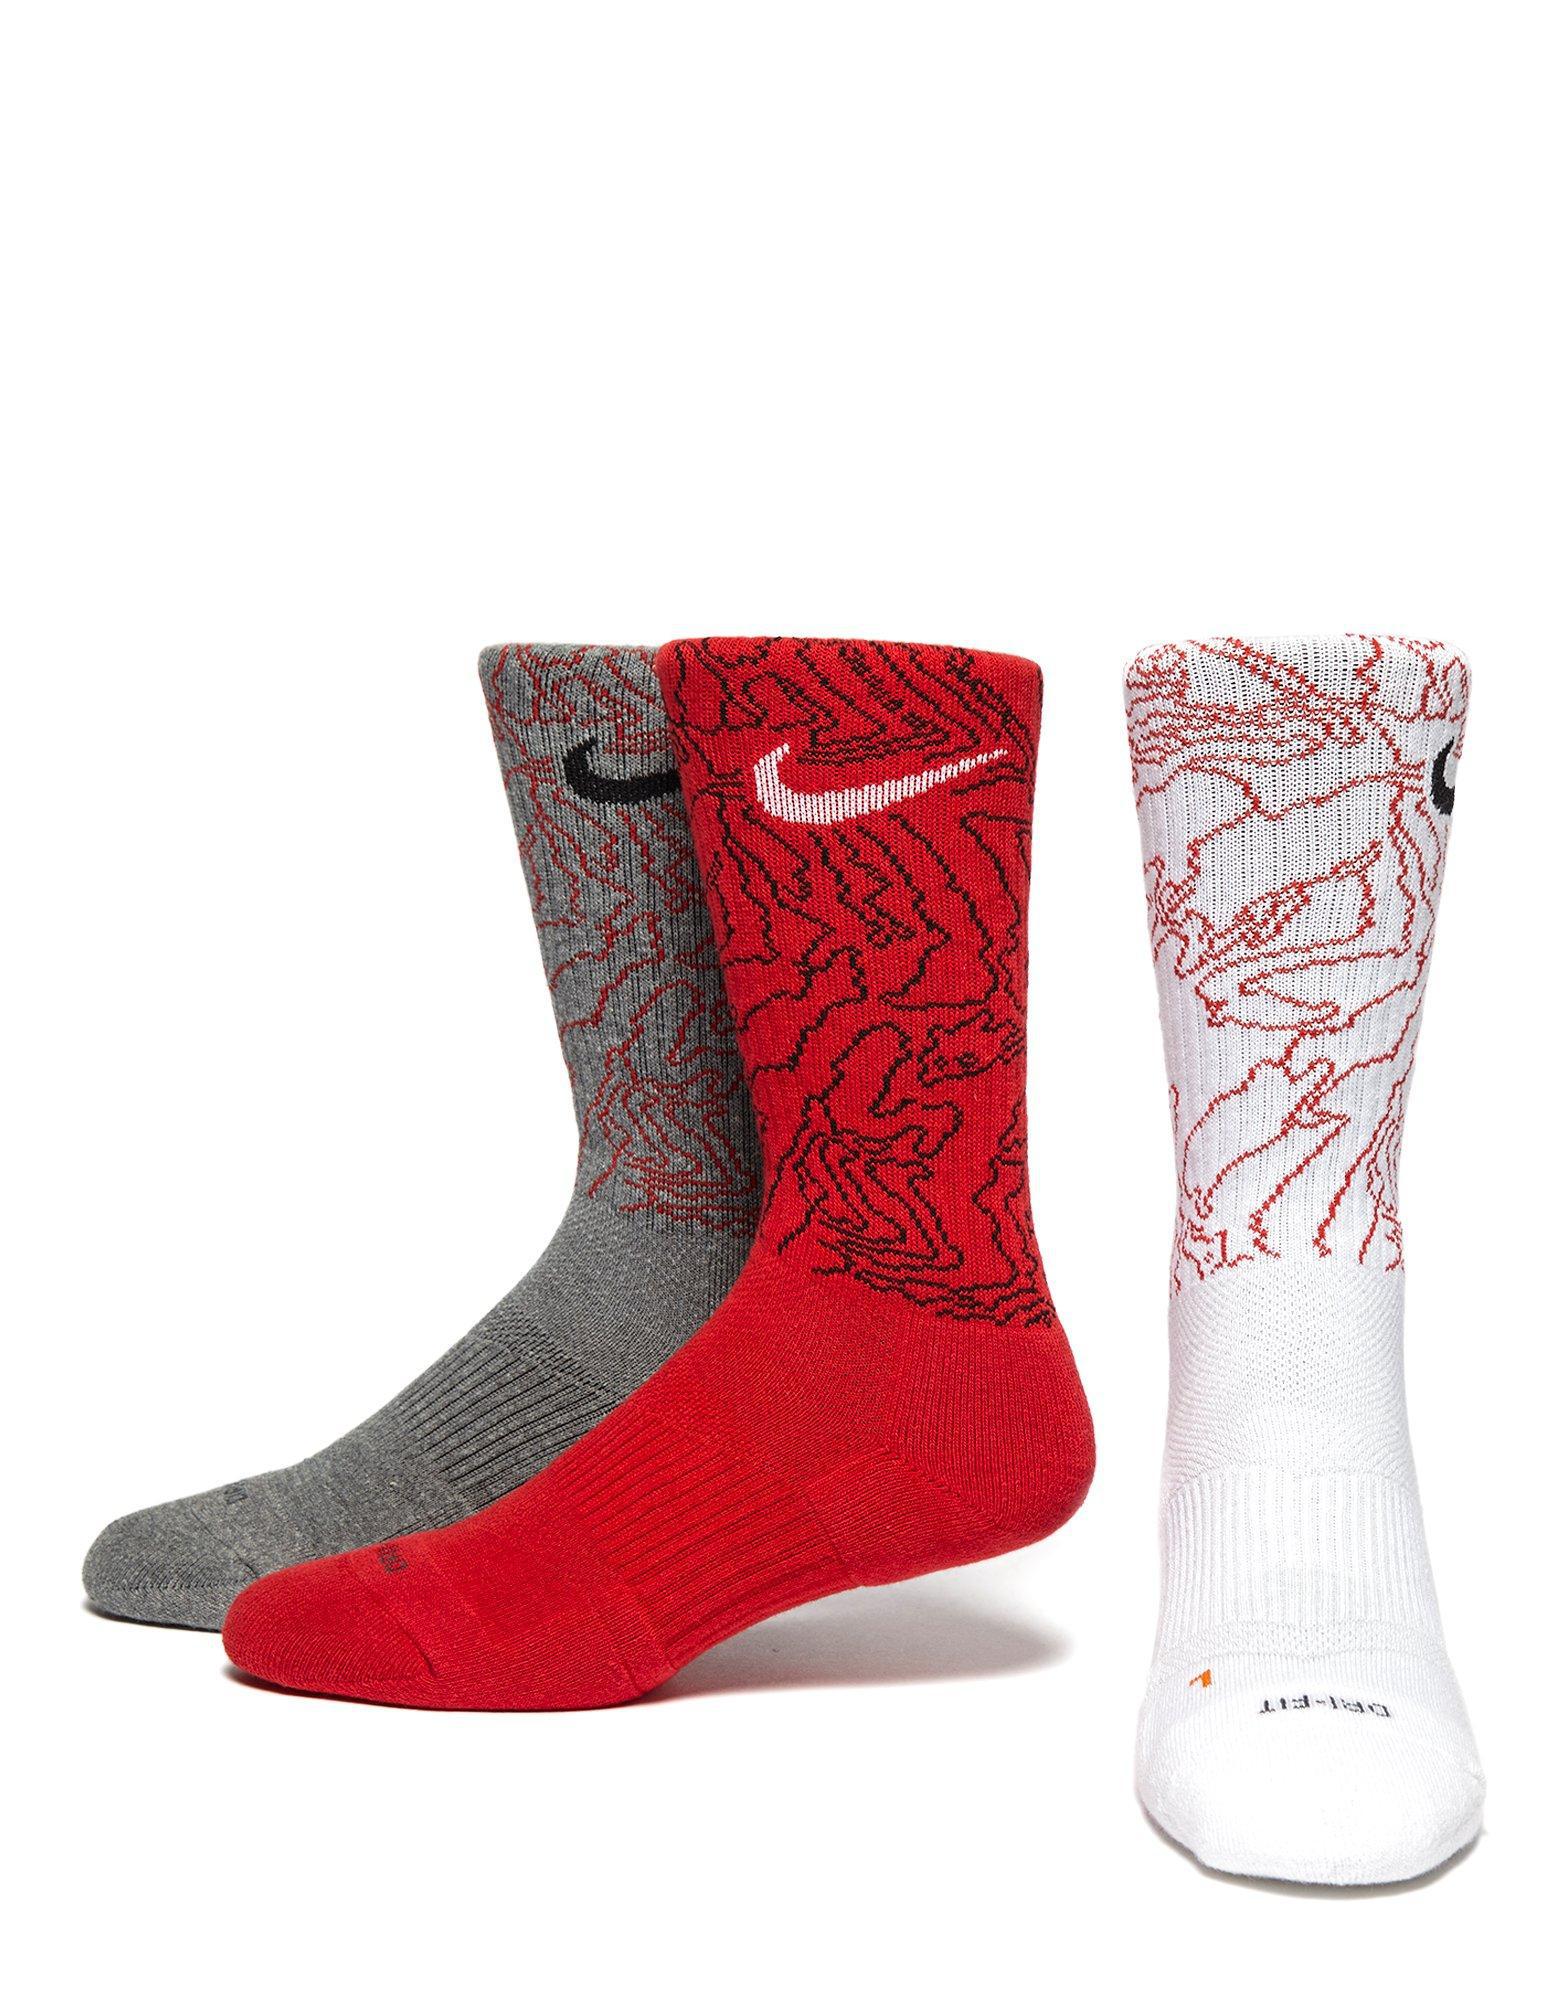 Nike Cotton 3 Pack Dri-fit Socks in Red/White/Charcoal (Red) for Men - Lyst